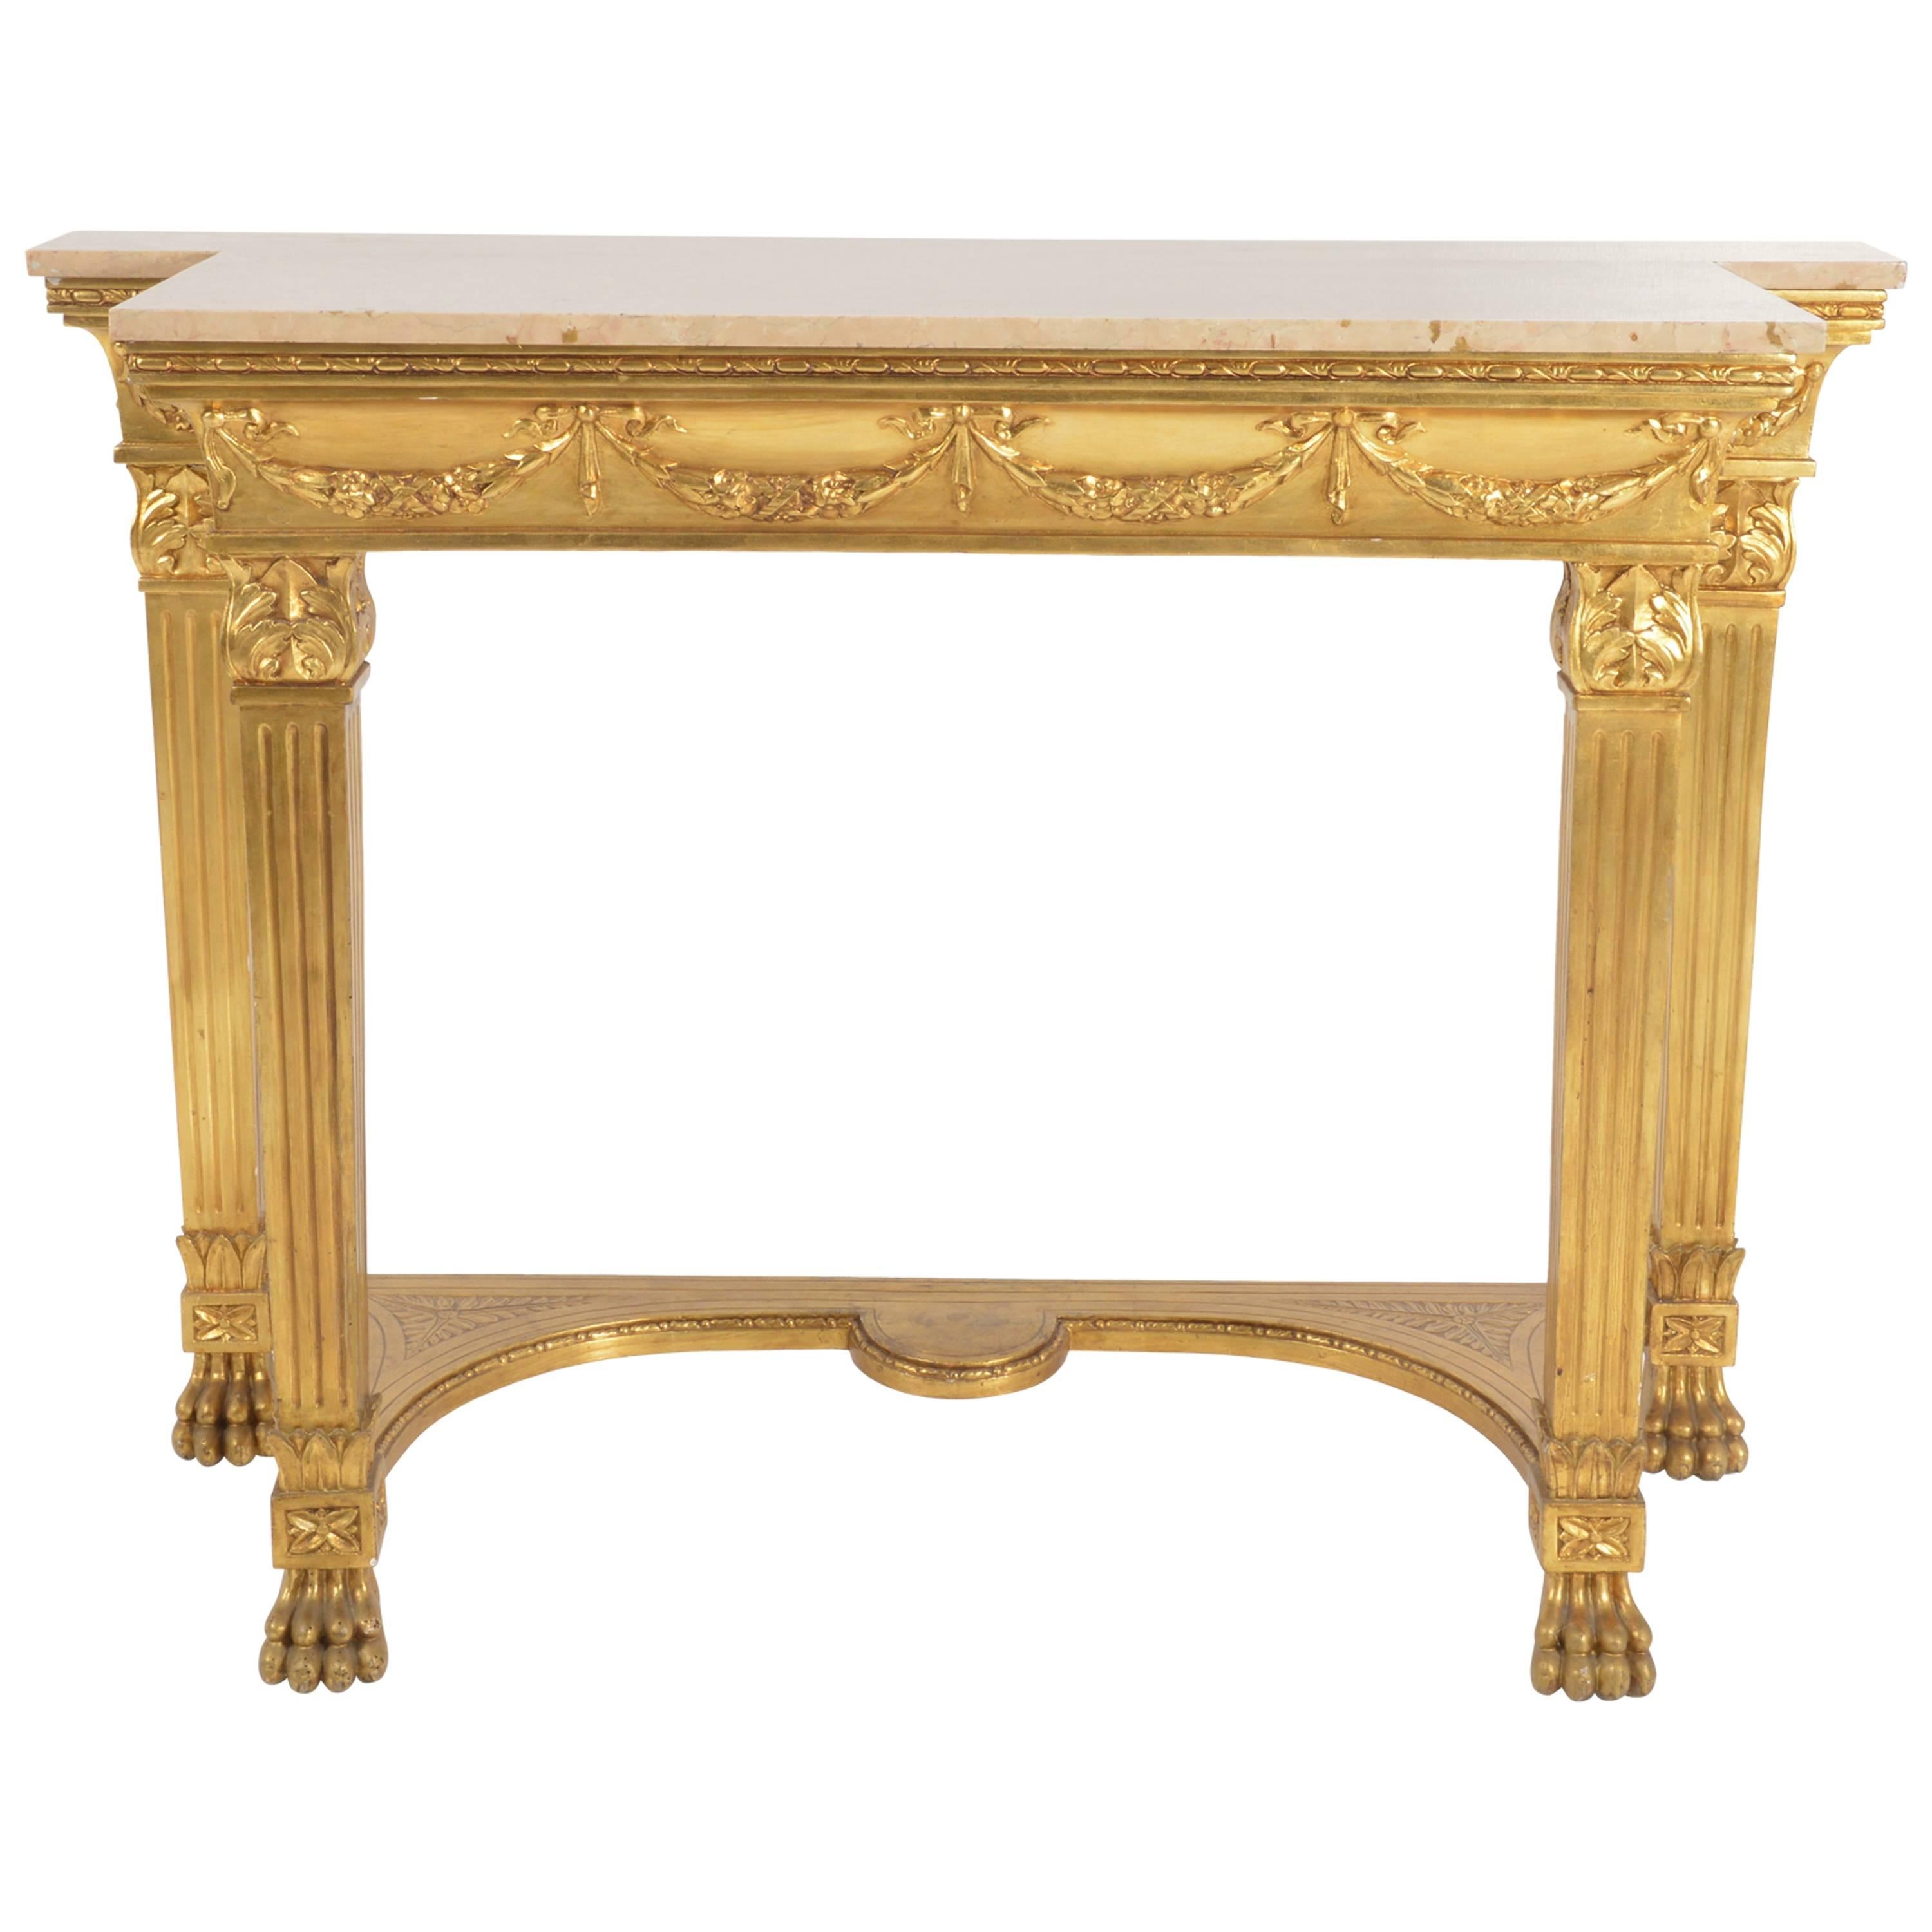 Genovese Giltwood Console with Sand coloured Marble Top, Italy, 1890